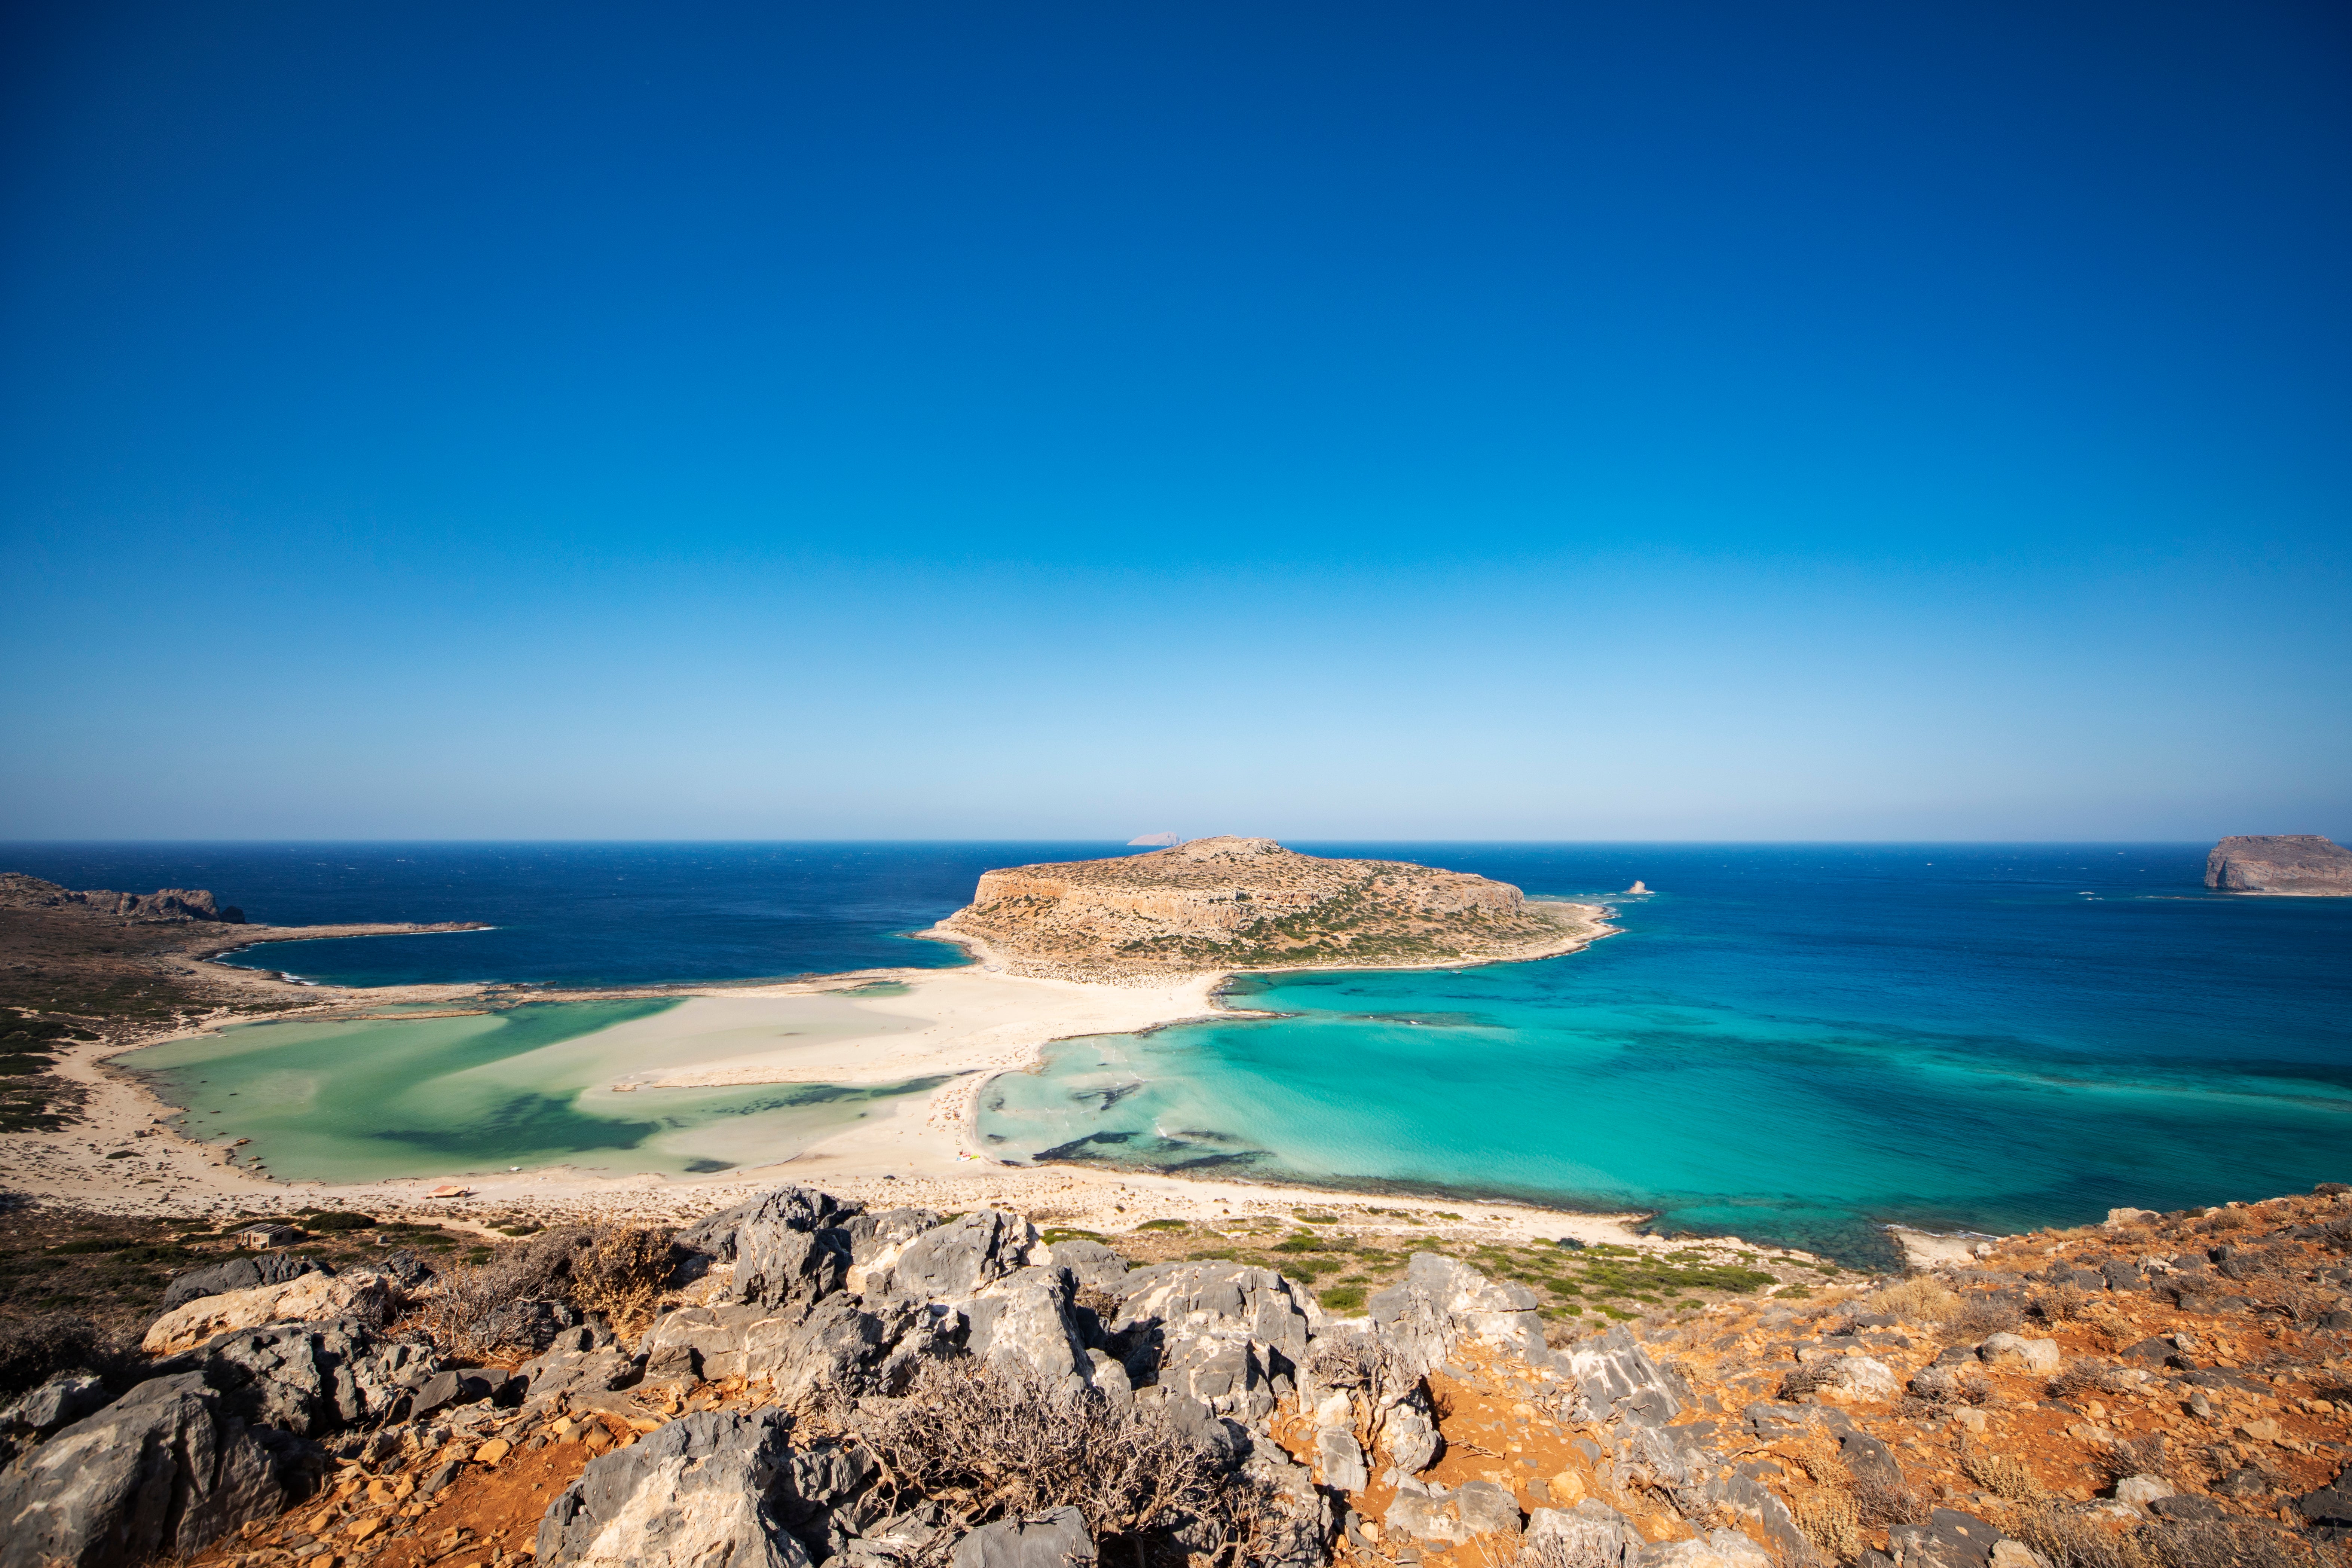 The Balos lagoon boasts some of Greece’s bluest waters